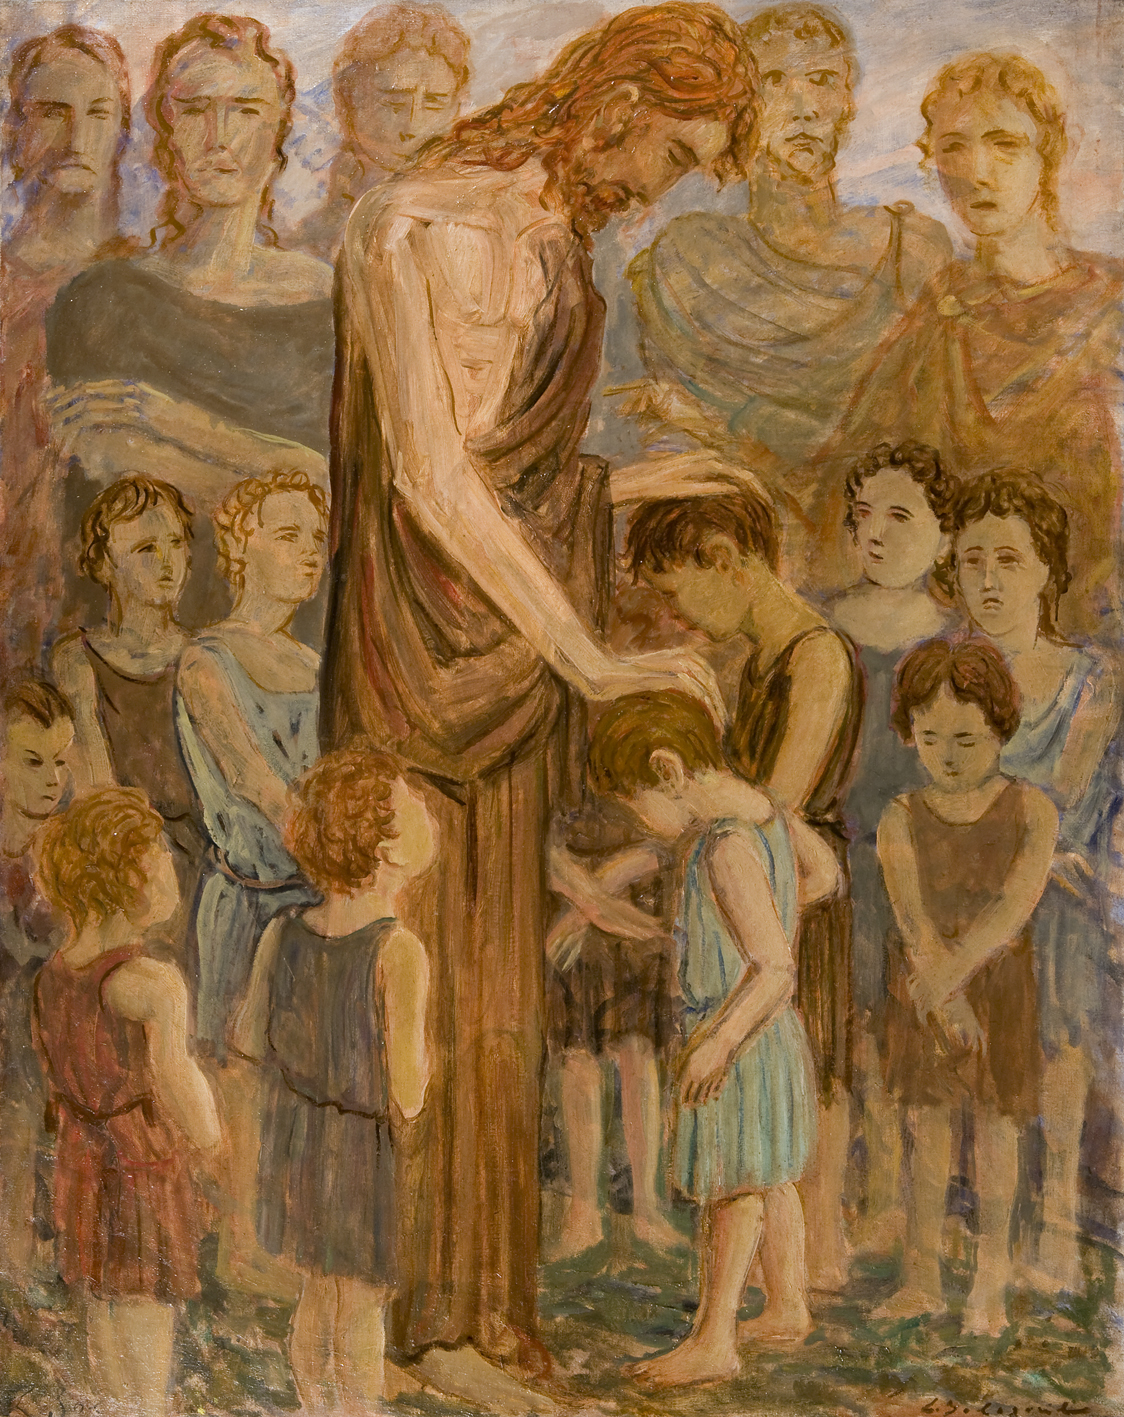 Christ with Children and Boy Climbing Tree